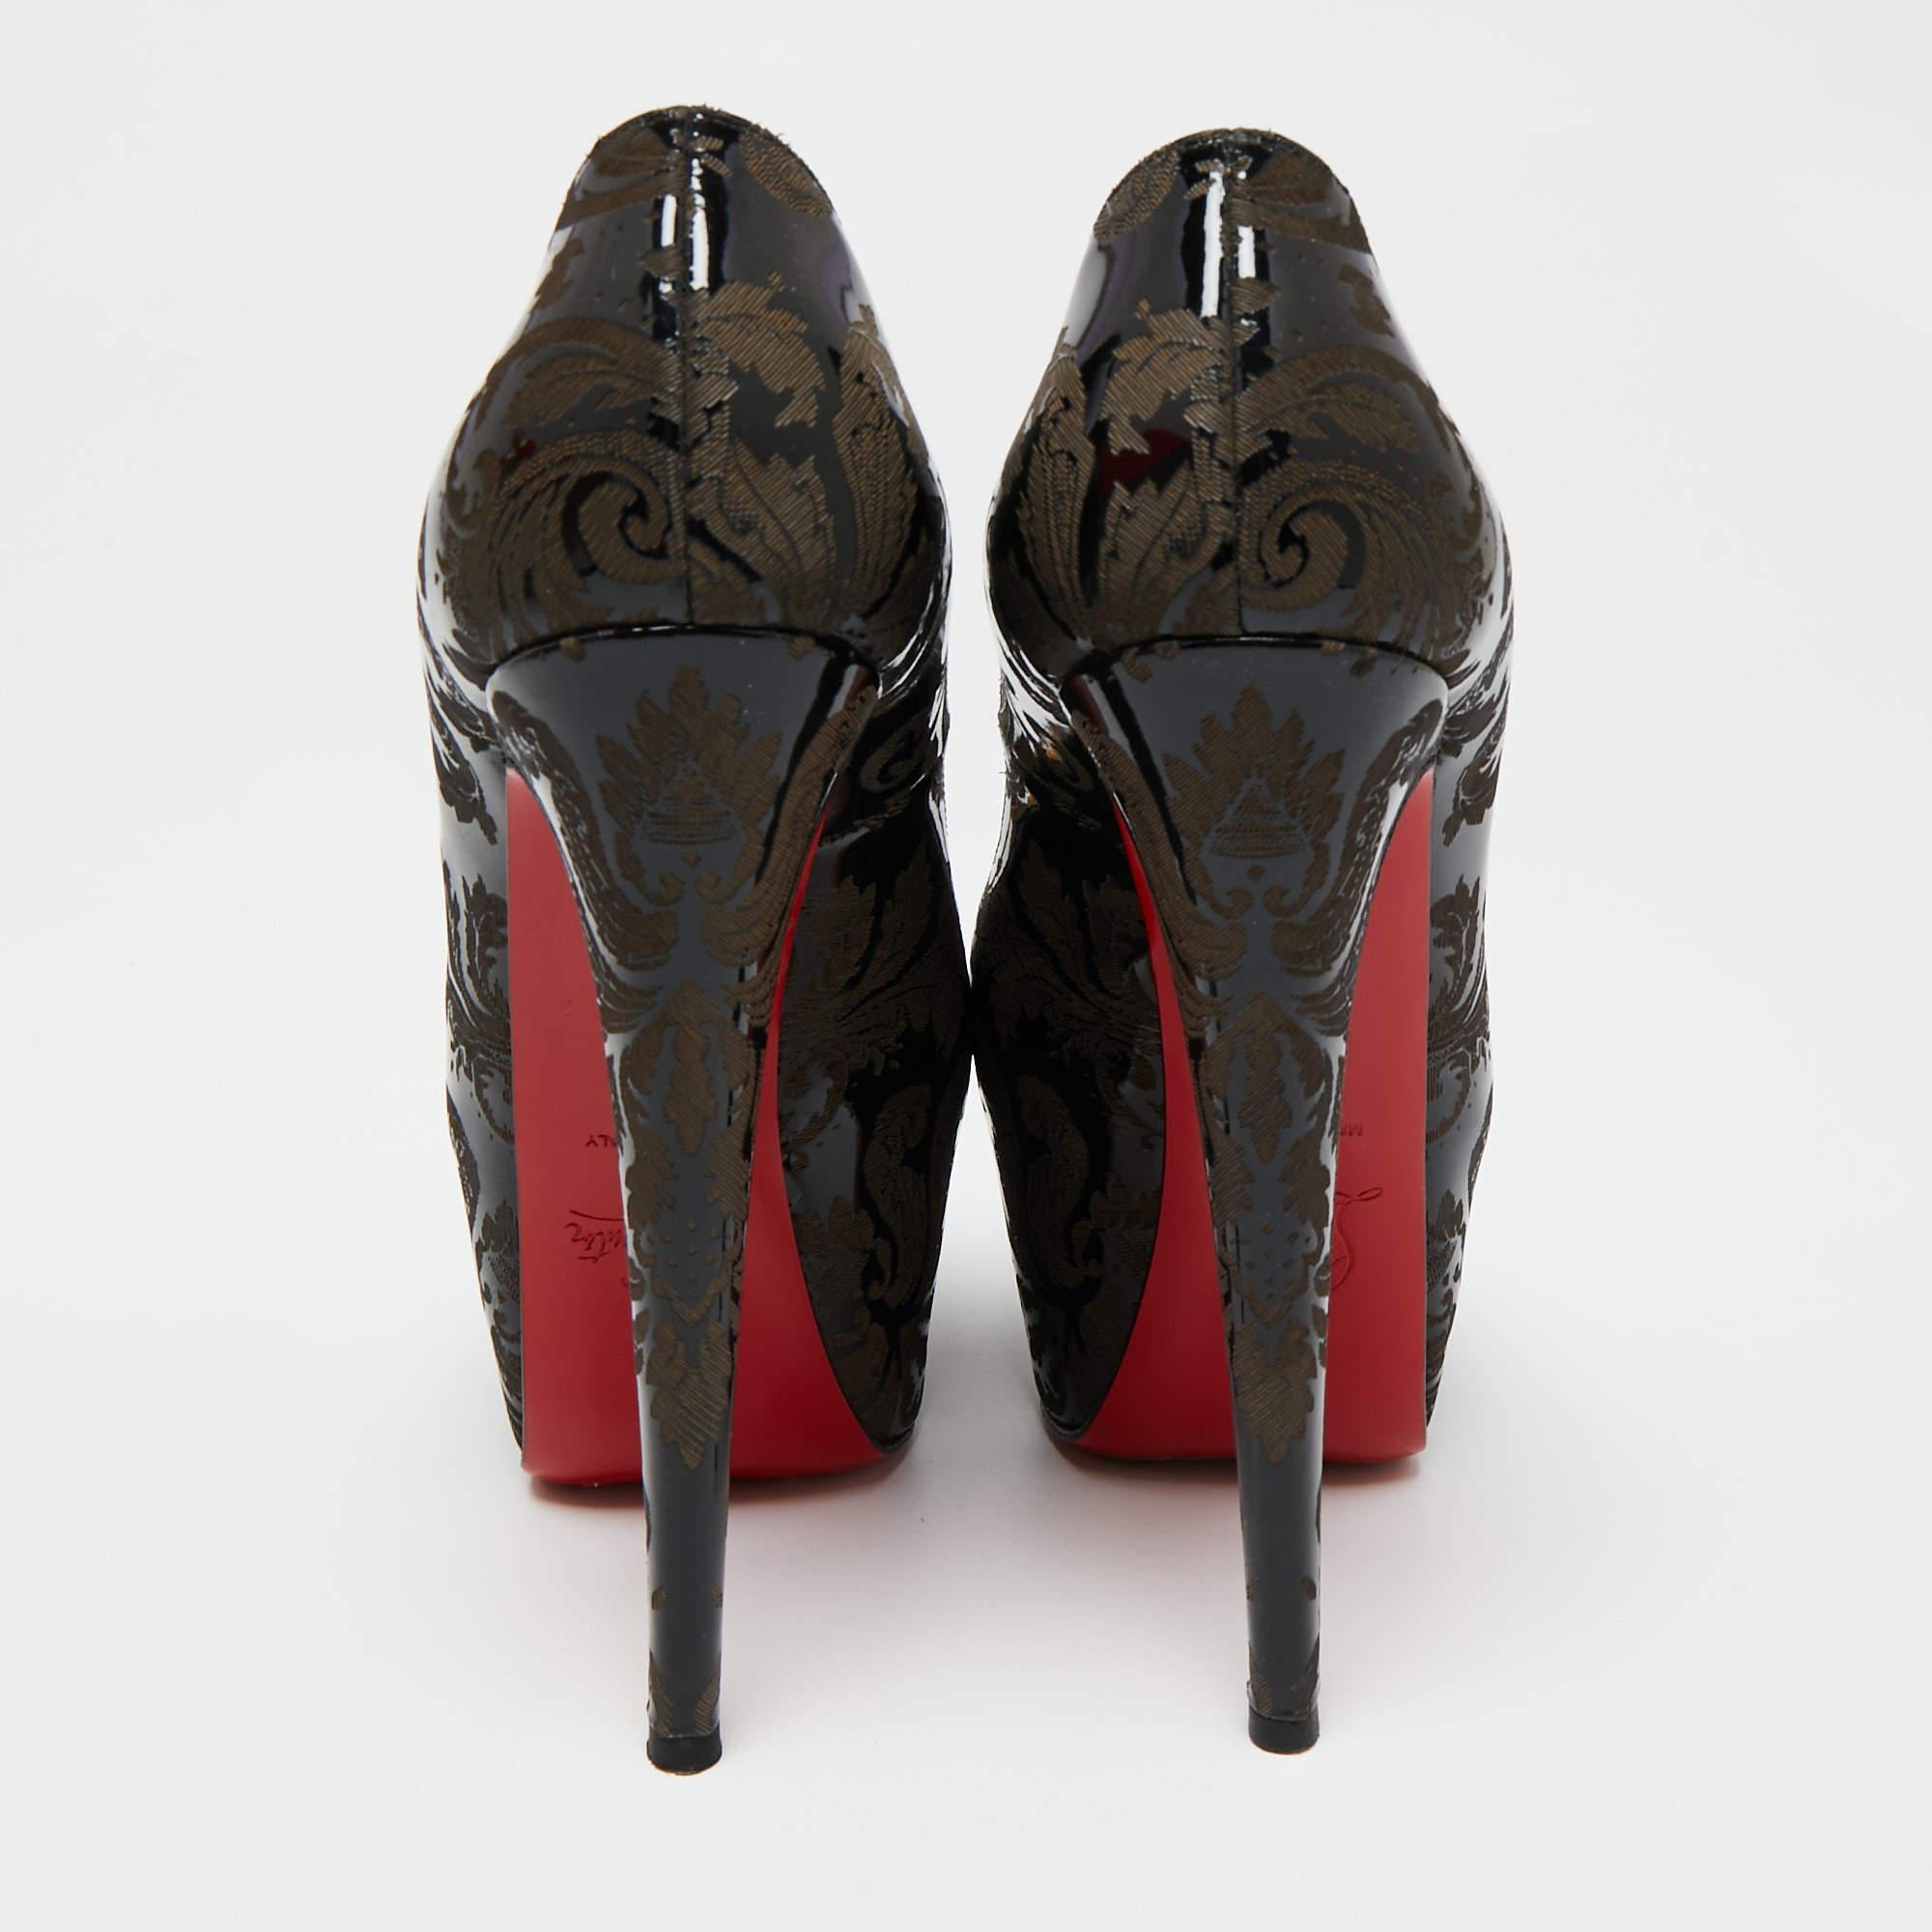 Set on towering heels and crafted with perfection, these Highness pumps from Christian Louboutin are here to elevate your style and take it higher! They are created using black-brown patent leather, highlighted with Arabesque detailing. They have